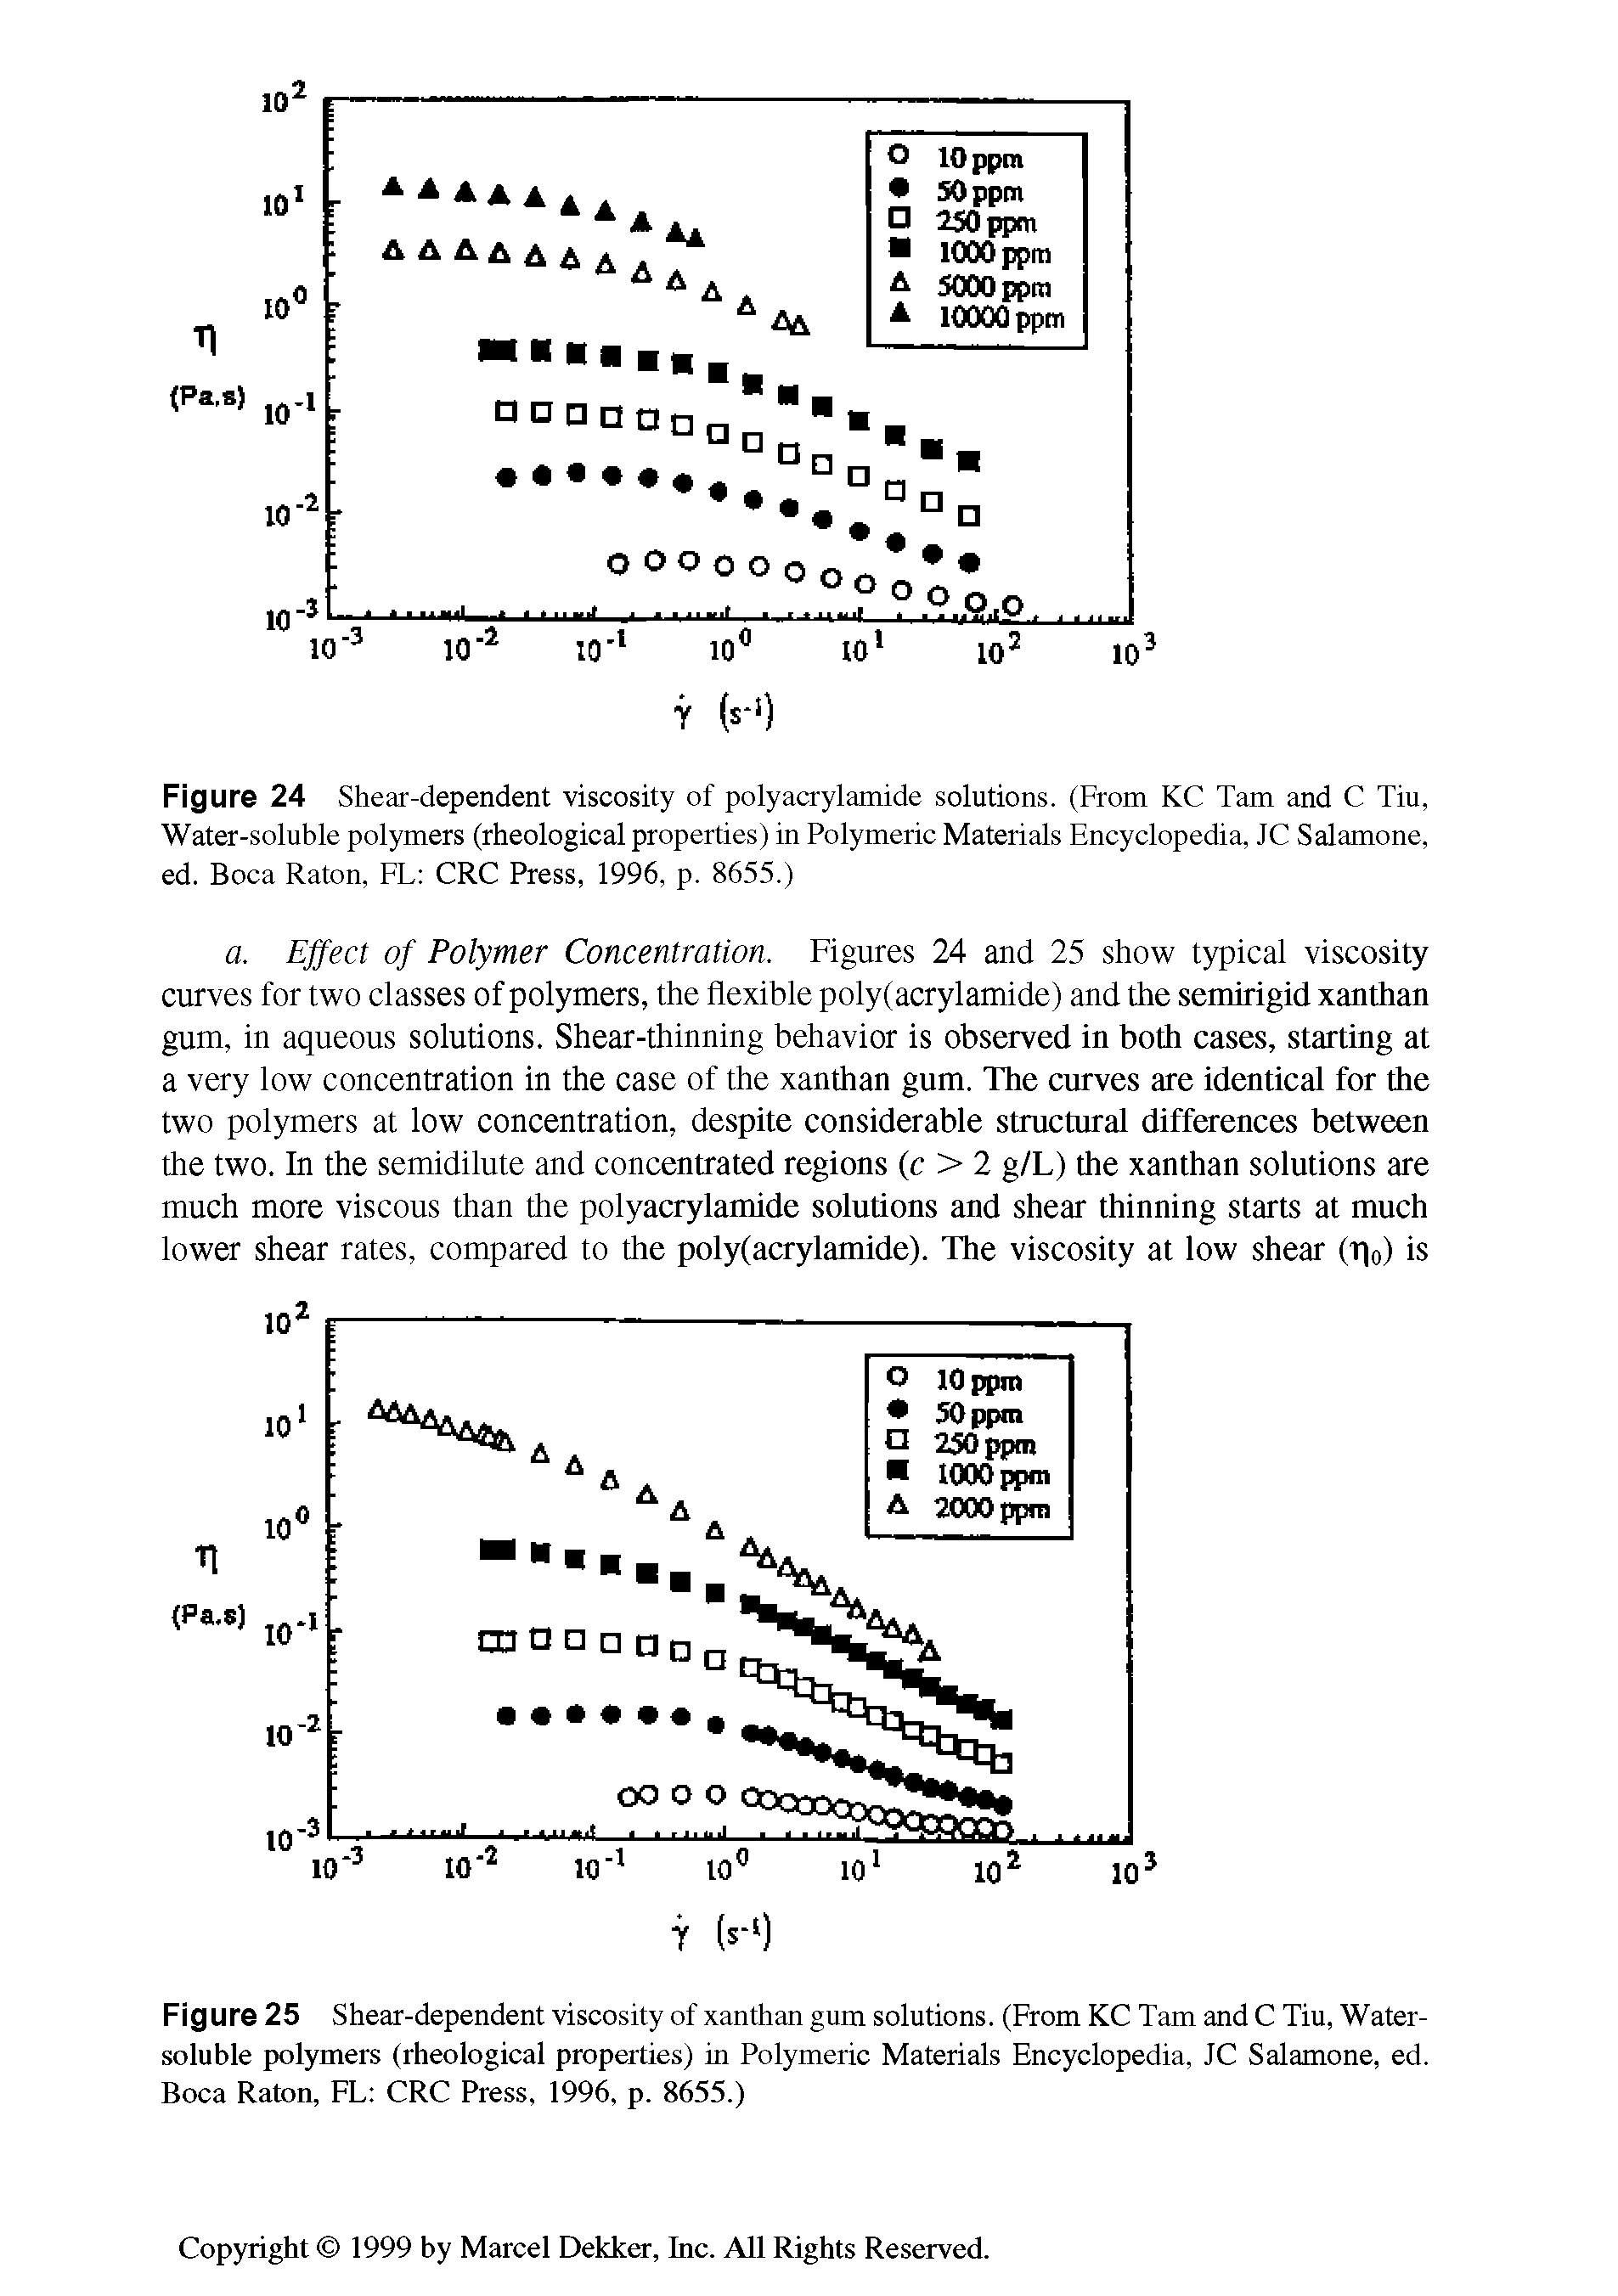 Figure 24 Shear-dependent viscosity of polyacrylamide solutions. (From KC Tam and C Tiu, Water-soluble polymers (rheological properties) in Polymeric Materials Encyclopedia, JC Salamone, ed. Boca Raton, FL CRC Press, 1996, p. 8655.)...